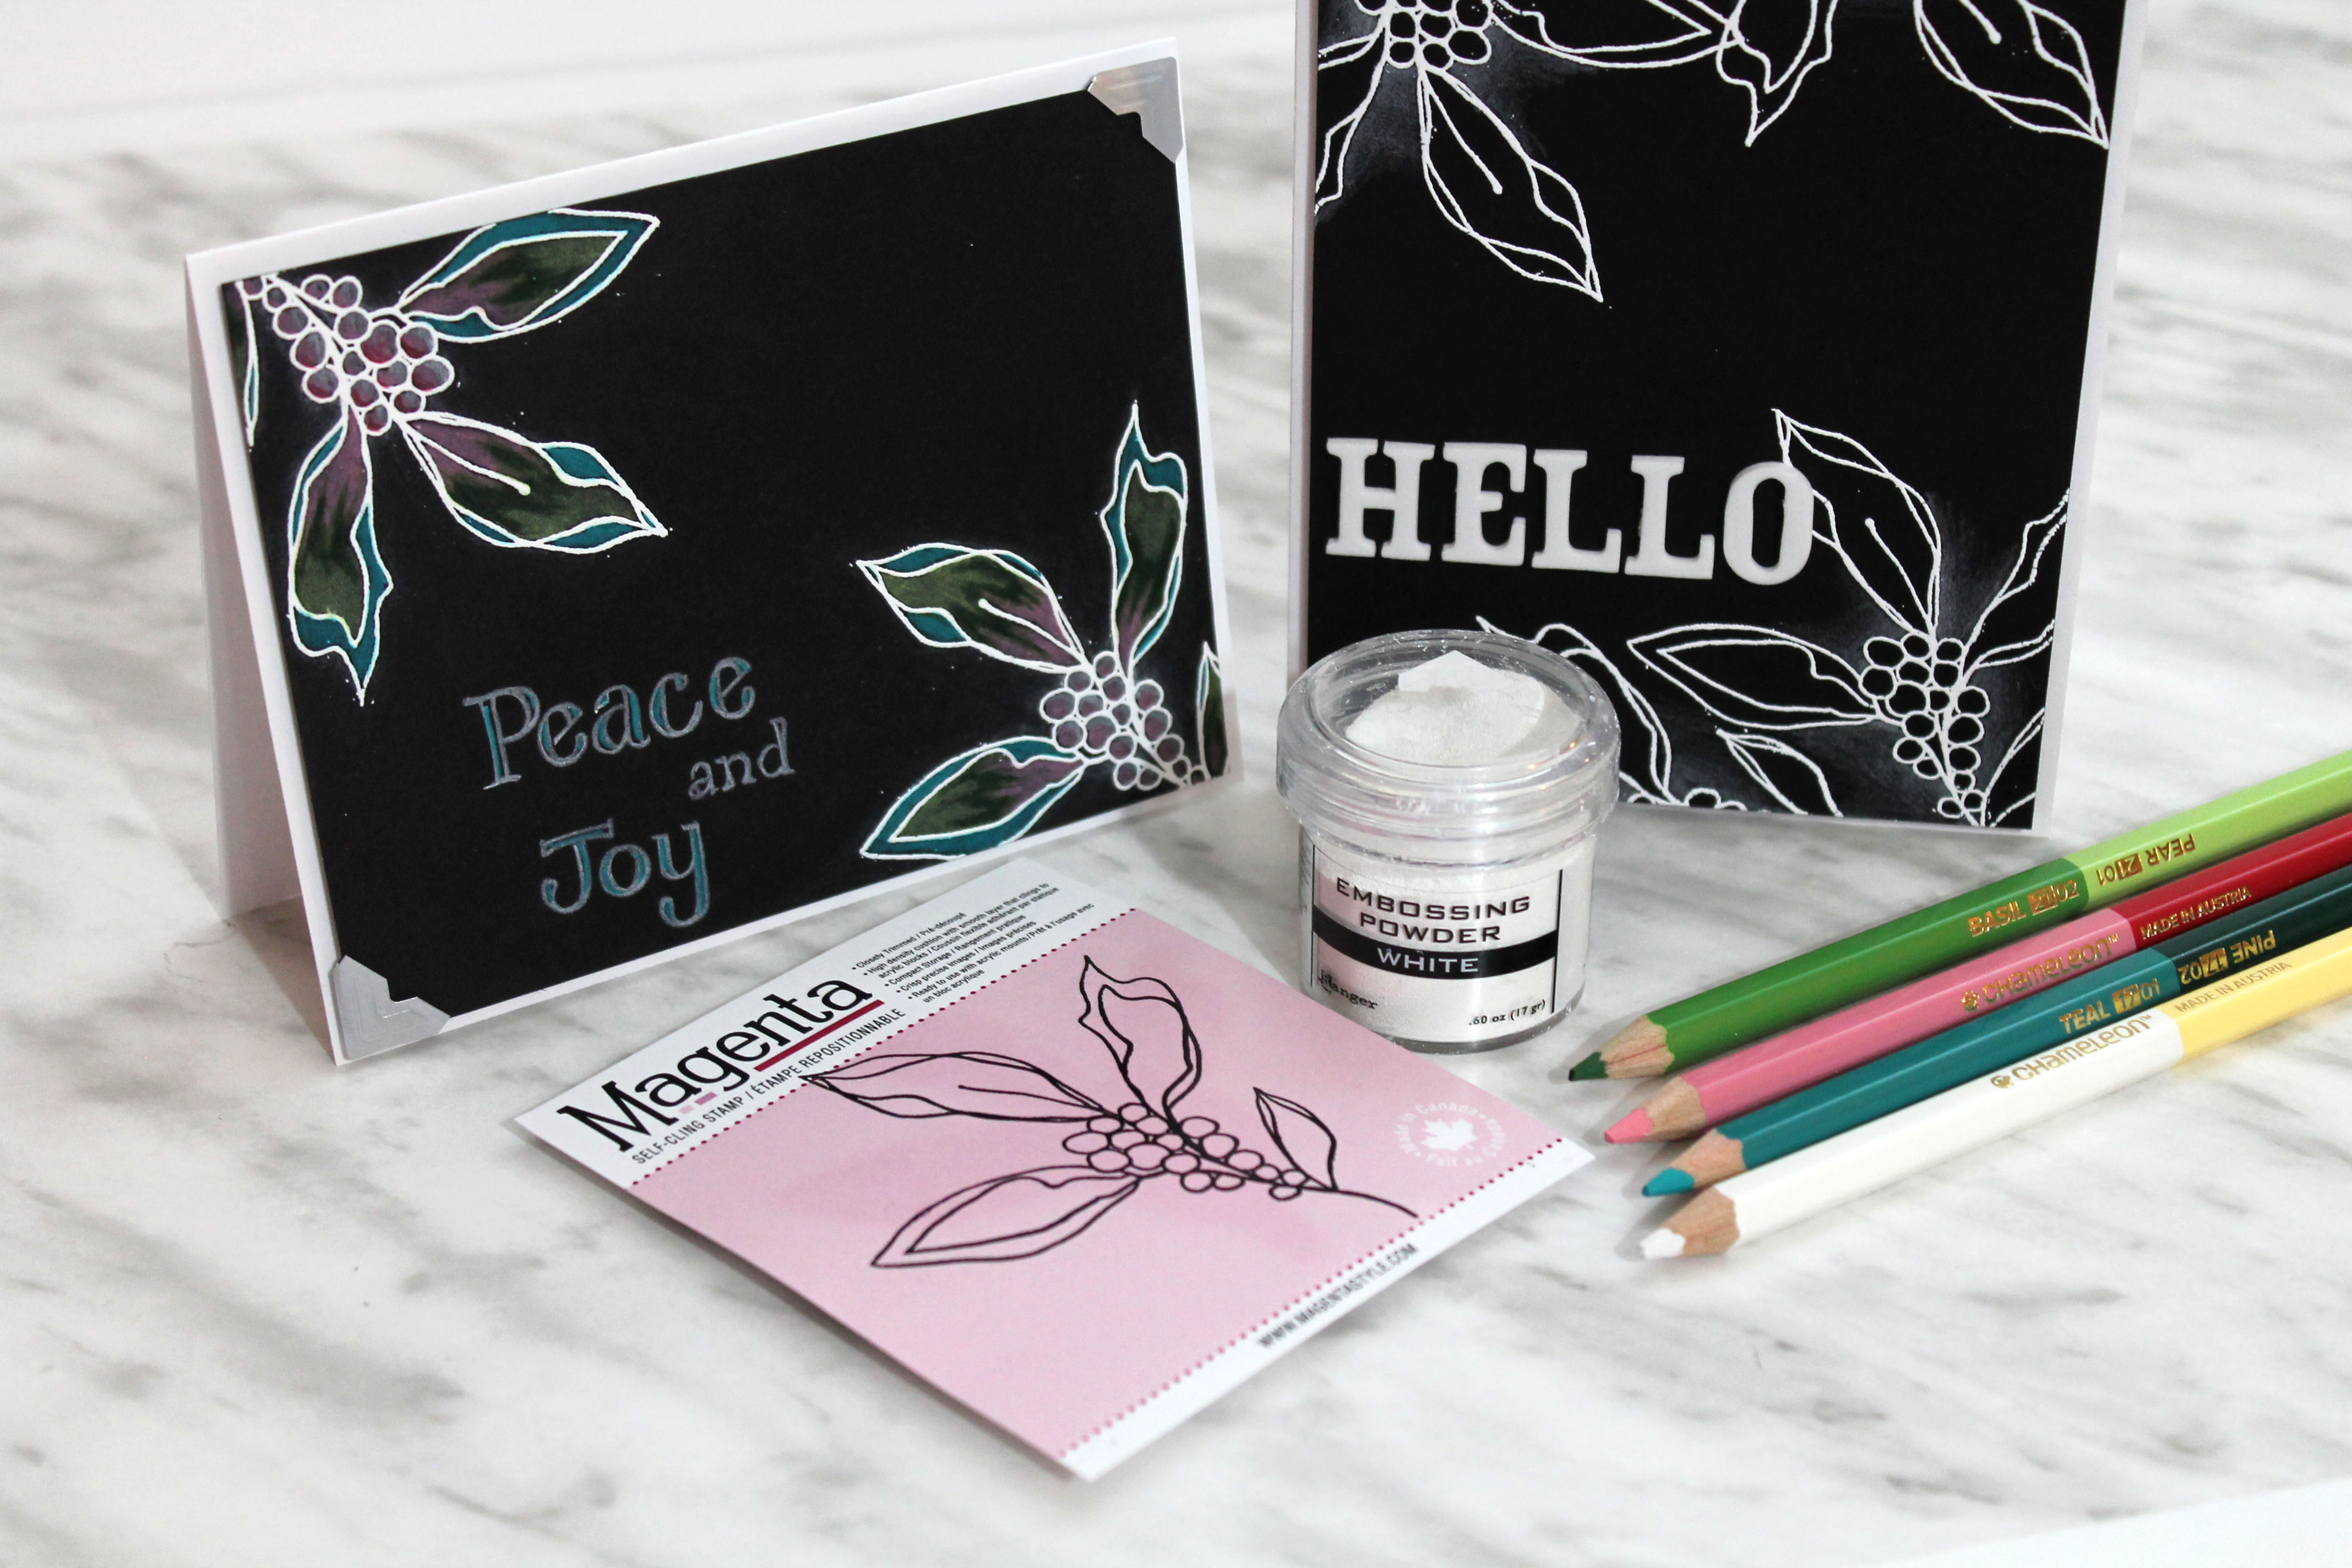 Coloring on black cardstock | Featuring Chameleon Coloring Pencils | Designed by Tracy McLennon | Creative Scrapbooker Magazine  #cardmaking #coloring #Stamping